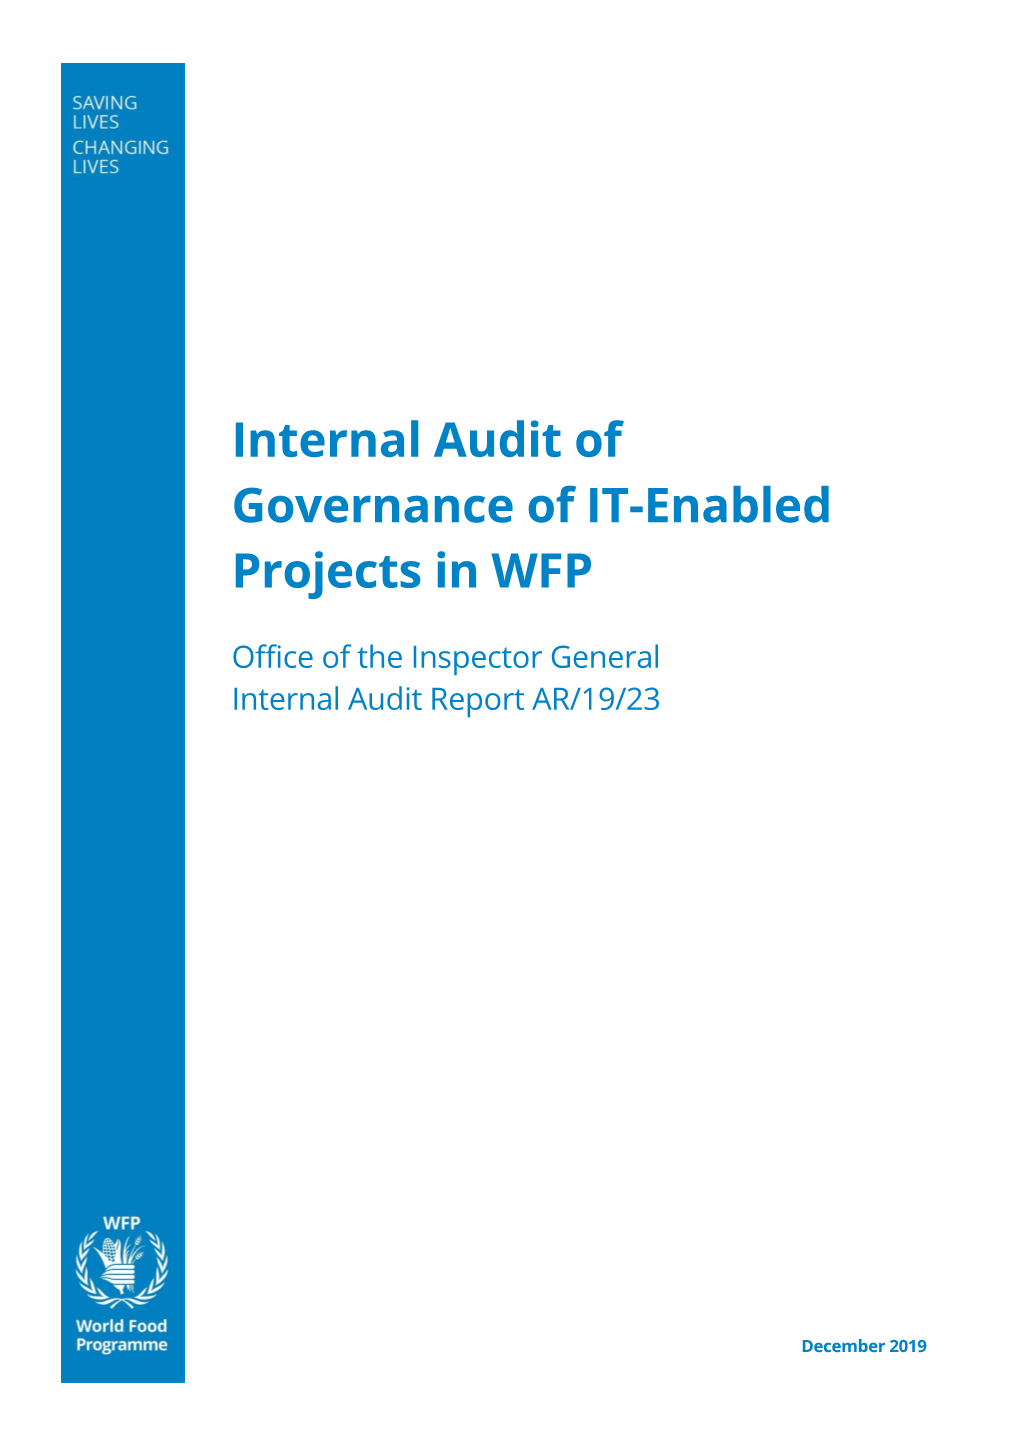 Internal Audit of Governance of IT-Enabled Projects In